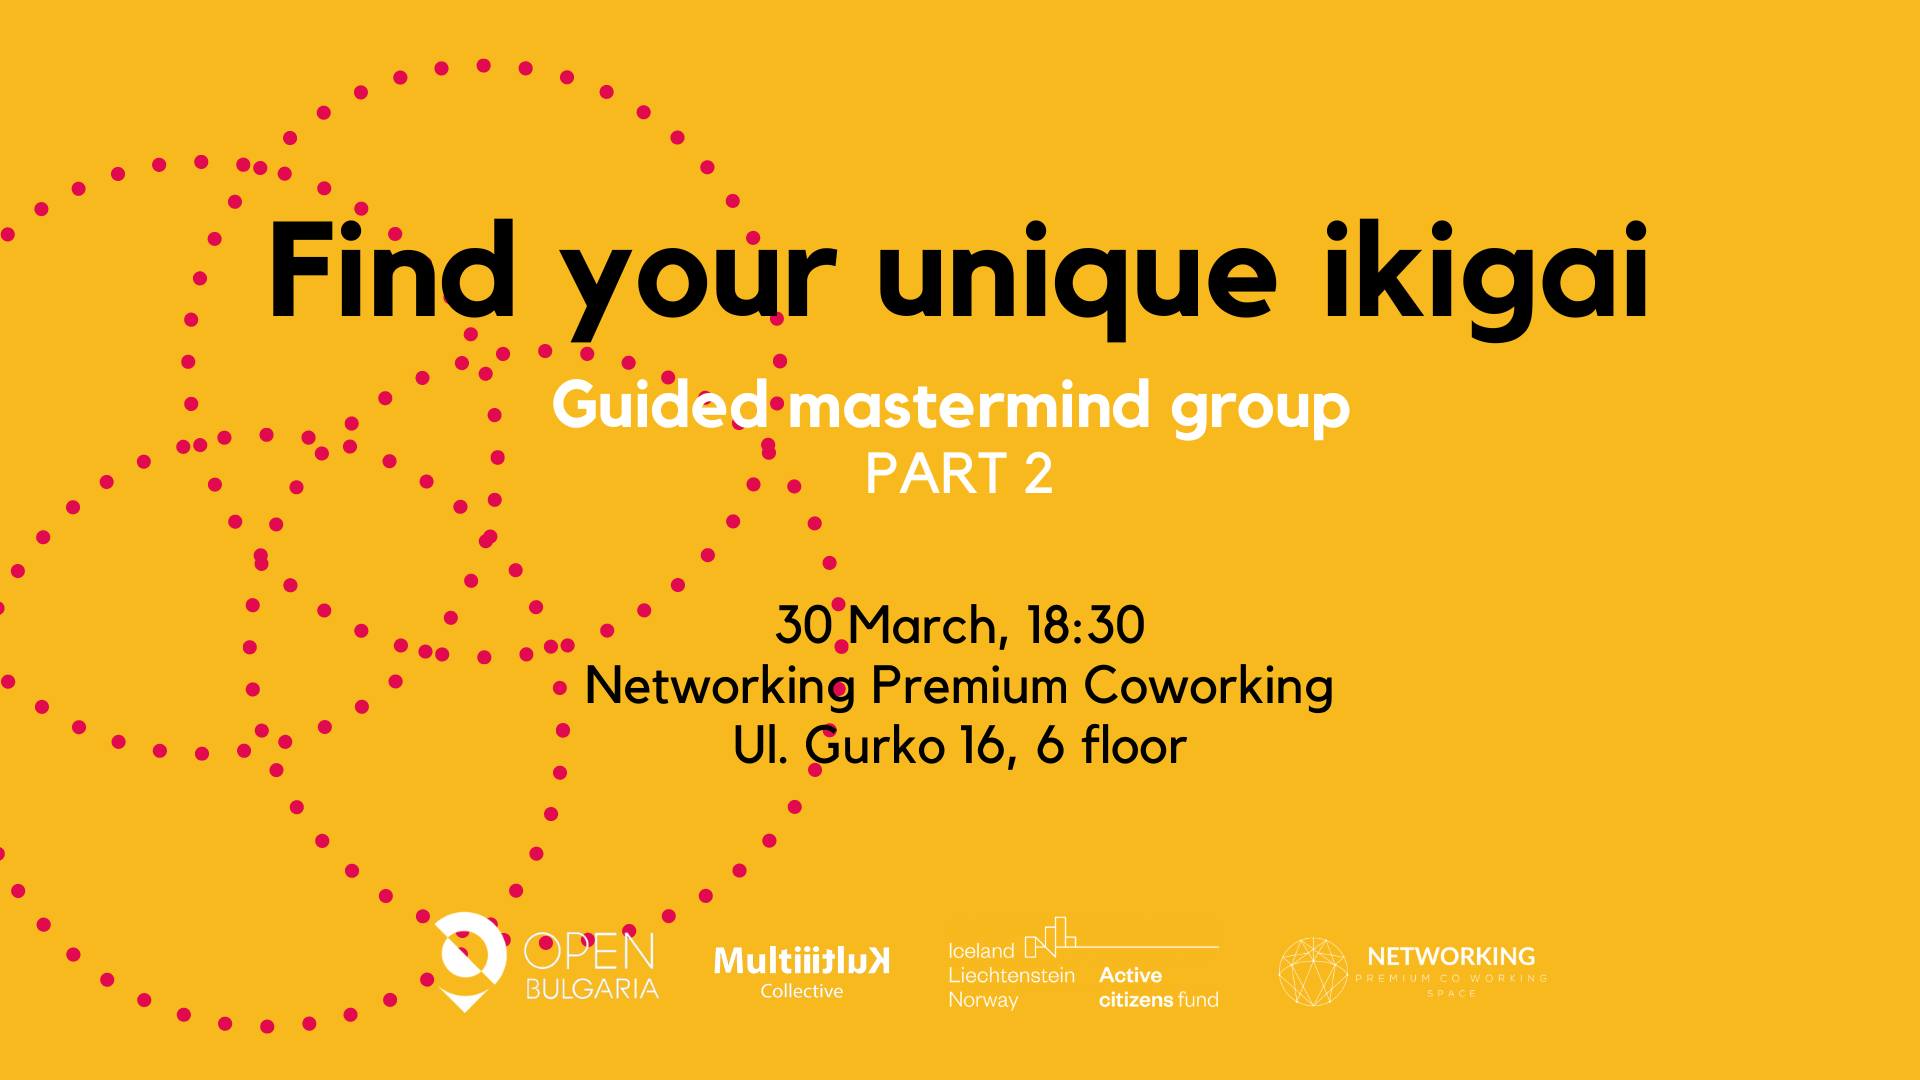 Find your unique ikigai: Guided mastermind group